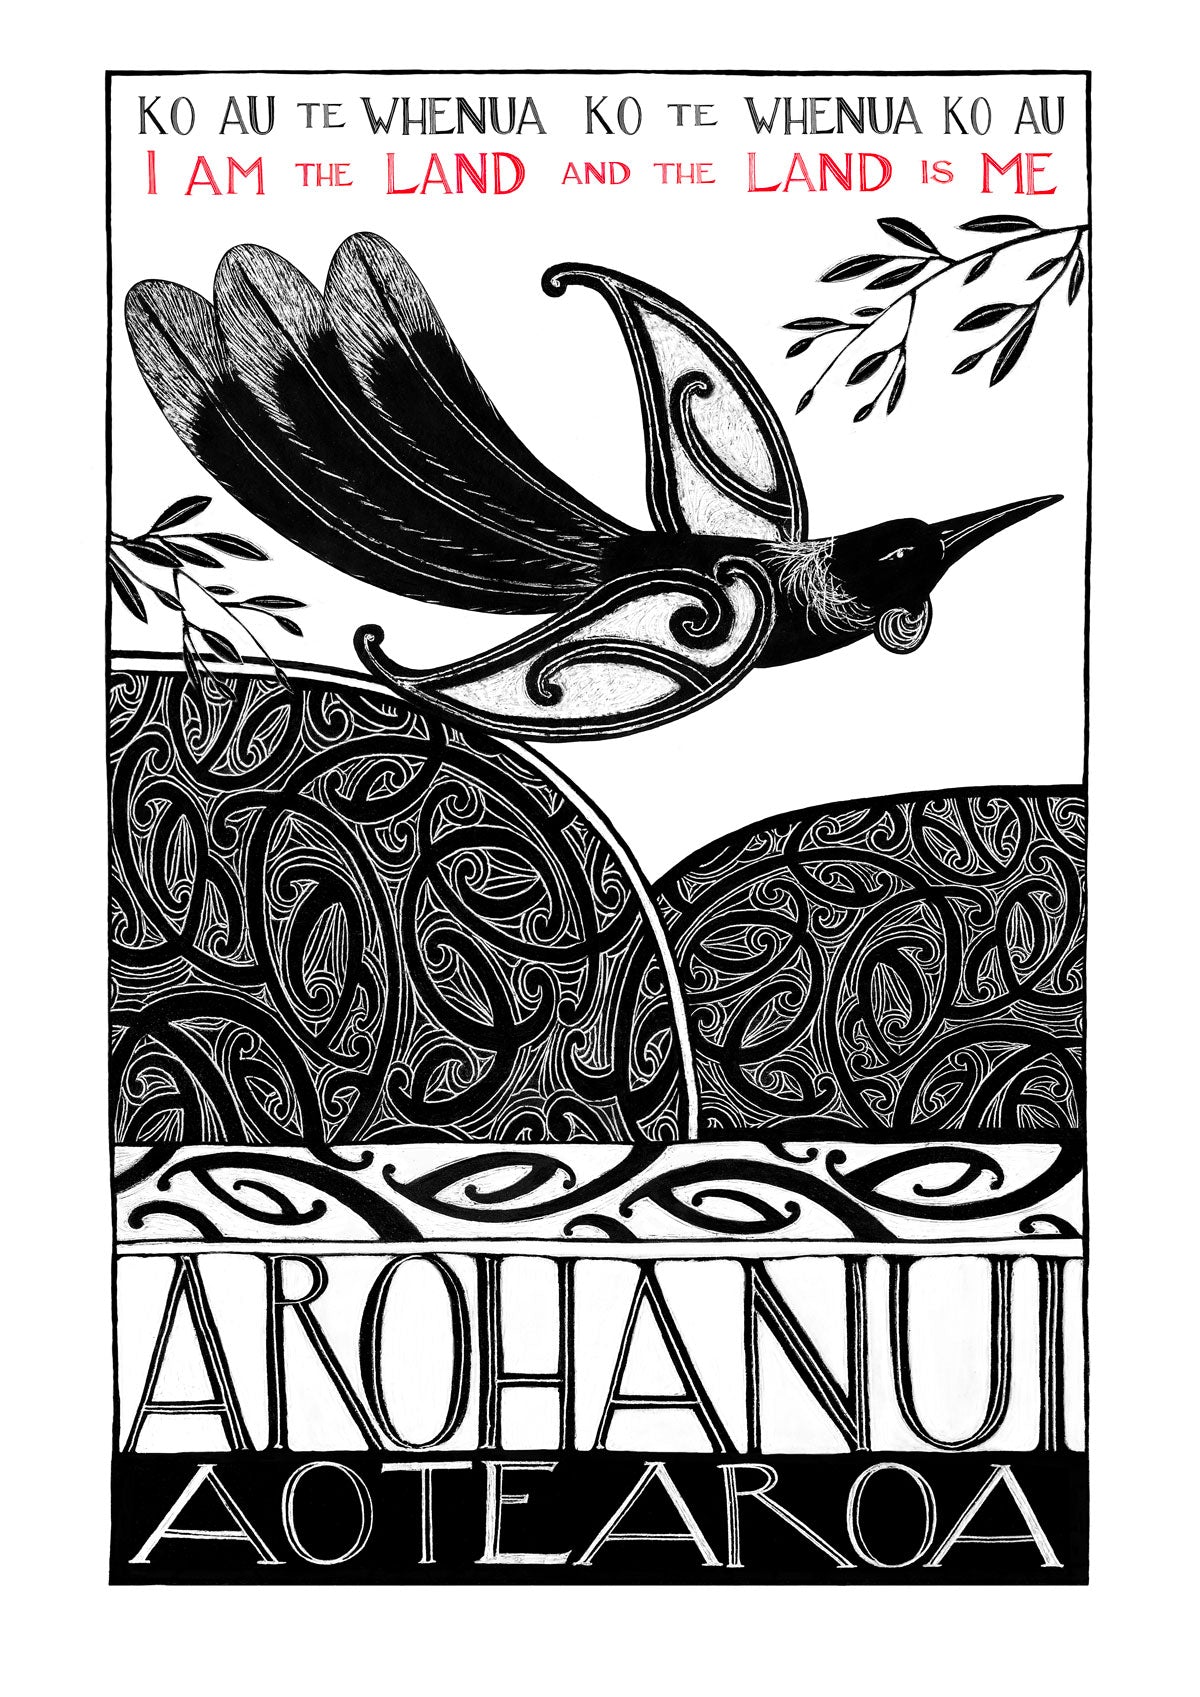 Ko au te whenua nz art print with maori art design tui and landscape with the words I am the land and the land is me - Ko au te whenua, ko te whenua ko au in te reo maori and english. A whakatauki, or maori proverb, about our connection to aotearoa new zealand . By Amber Smith nz artist.